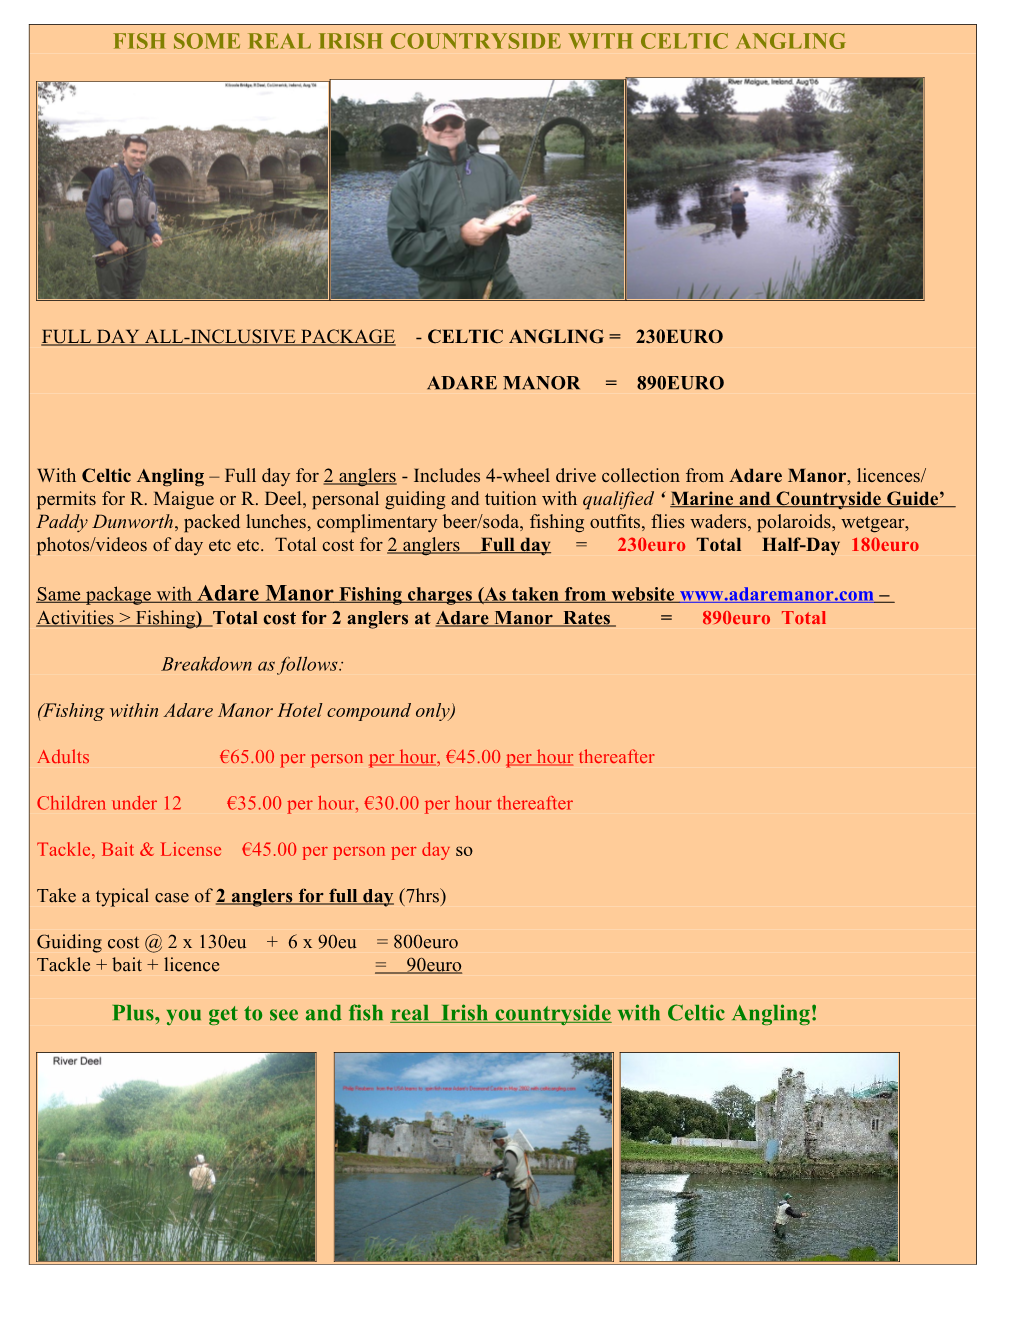 Fish Some Real Irish Countryside with Celtic Angling